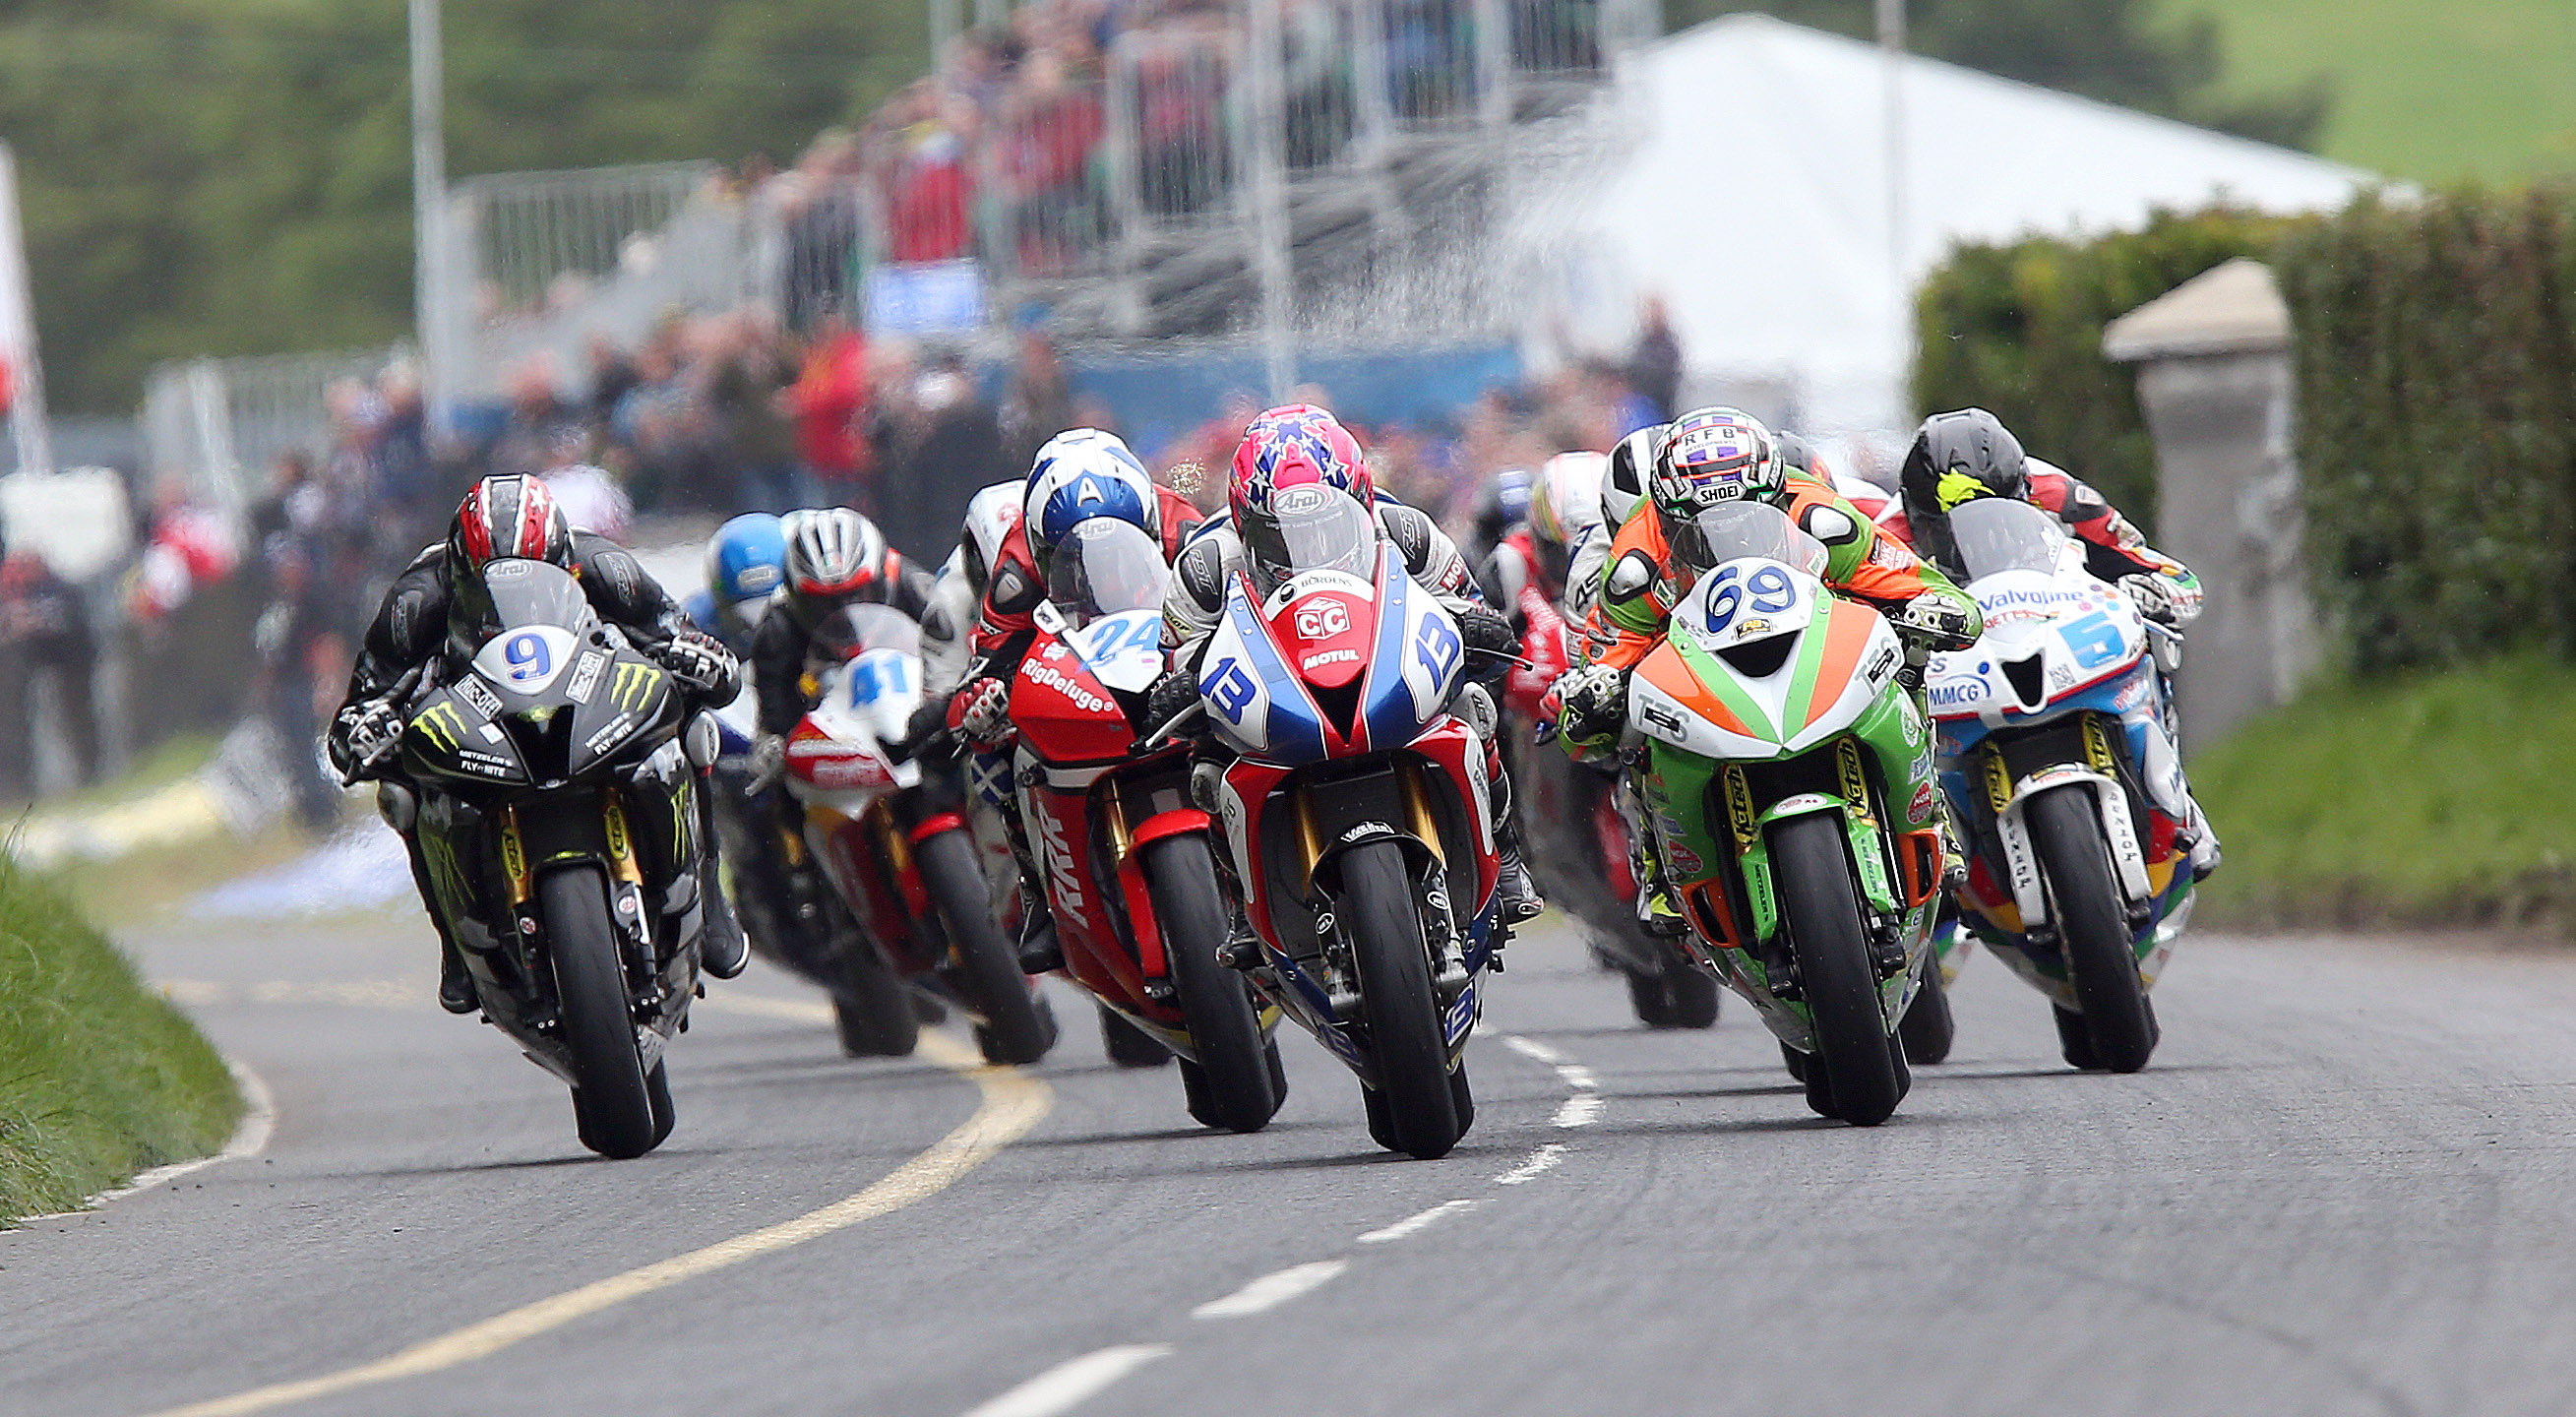 Revised schedule announced for 2016 Ulster Grand Prix